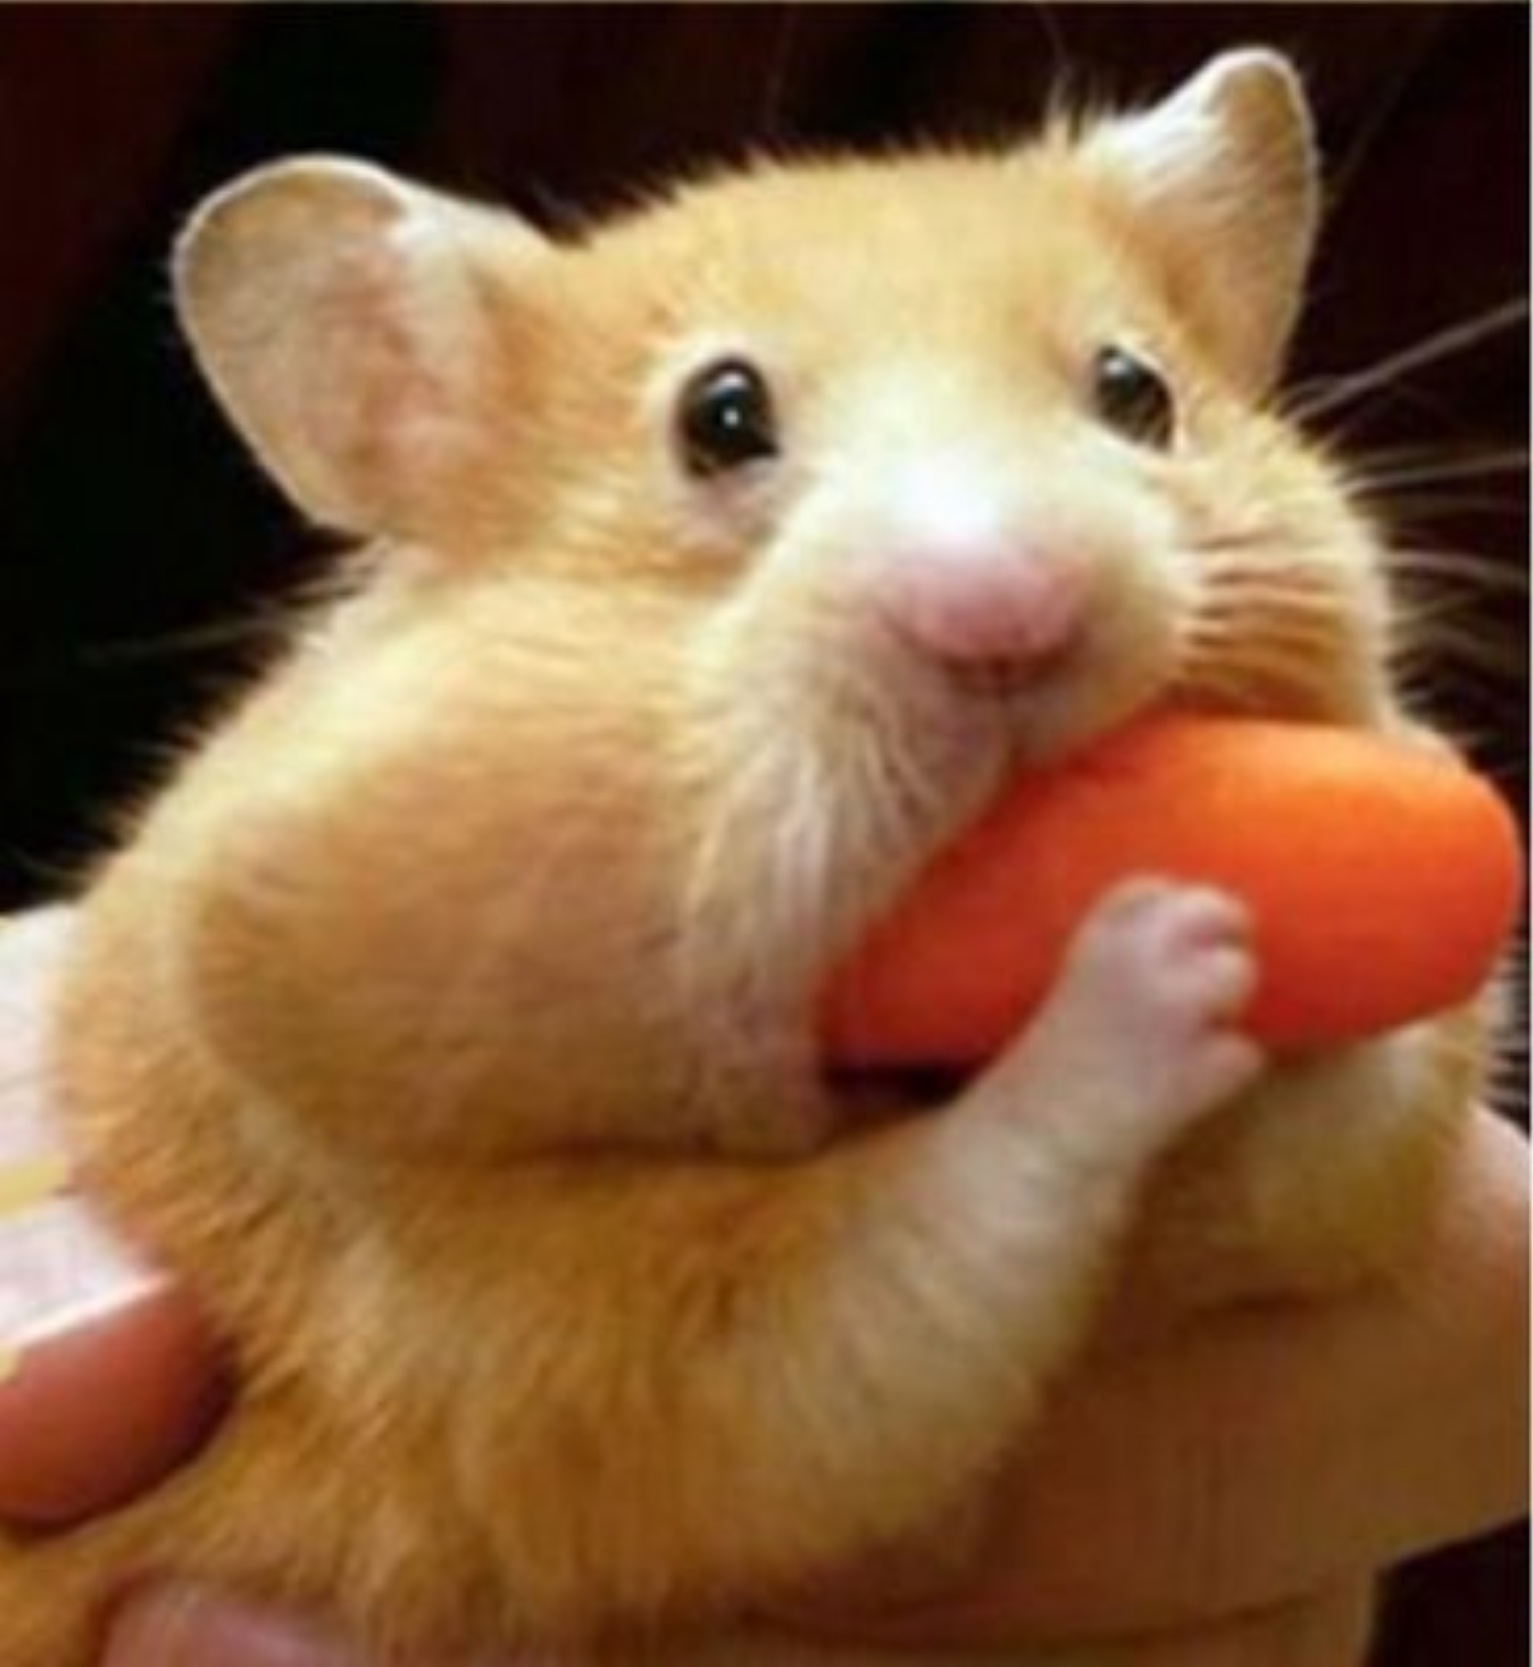 Adorable Japanese Hamster Eating A Carrot Before Sleeping Is Taking Over The Internet